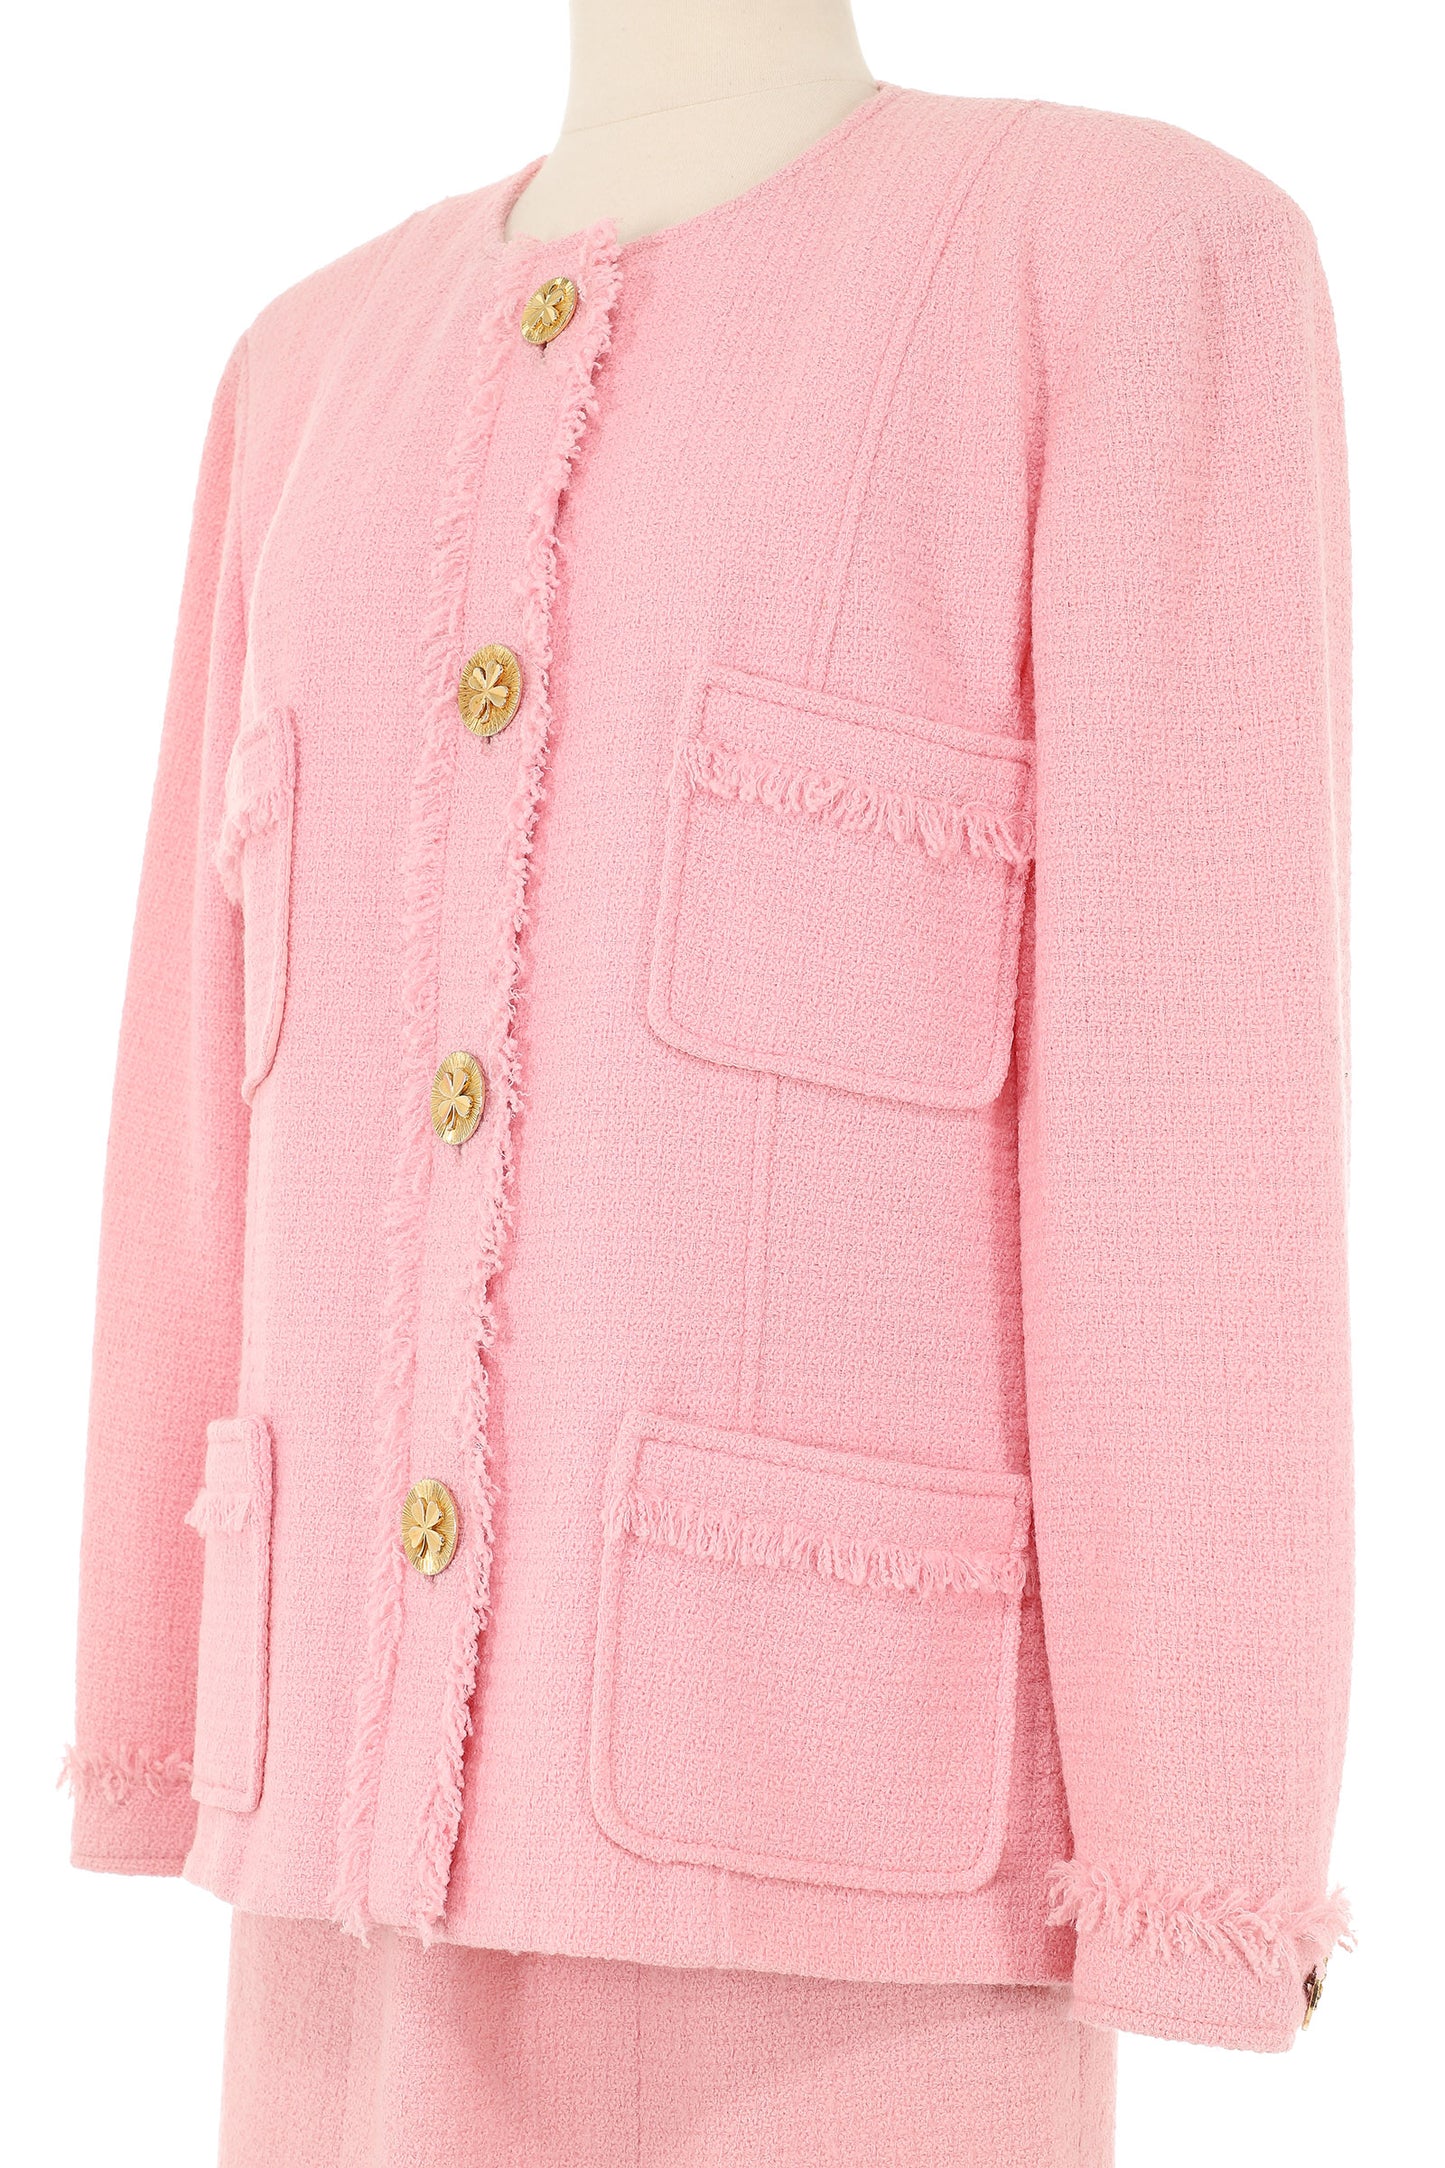 Chanel Fall 1990 Pink Skirt Suit with Clover Buttons